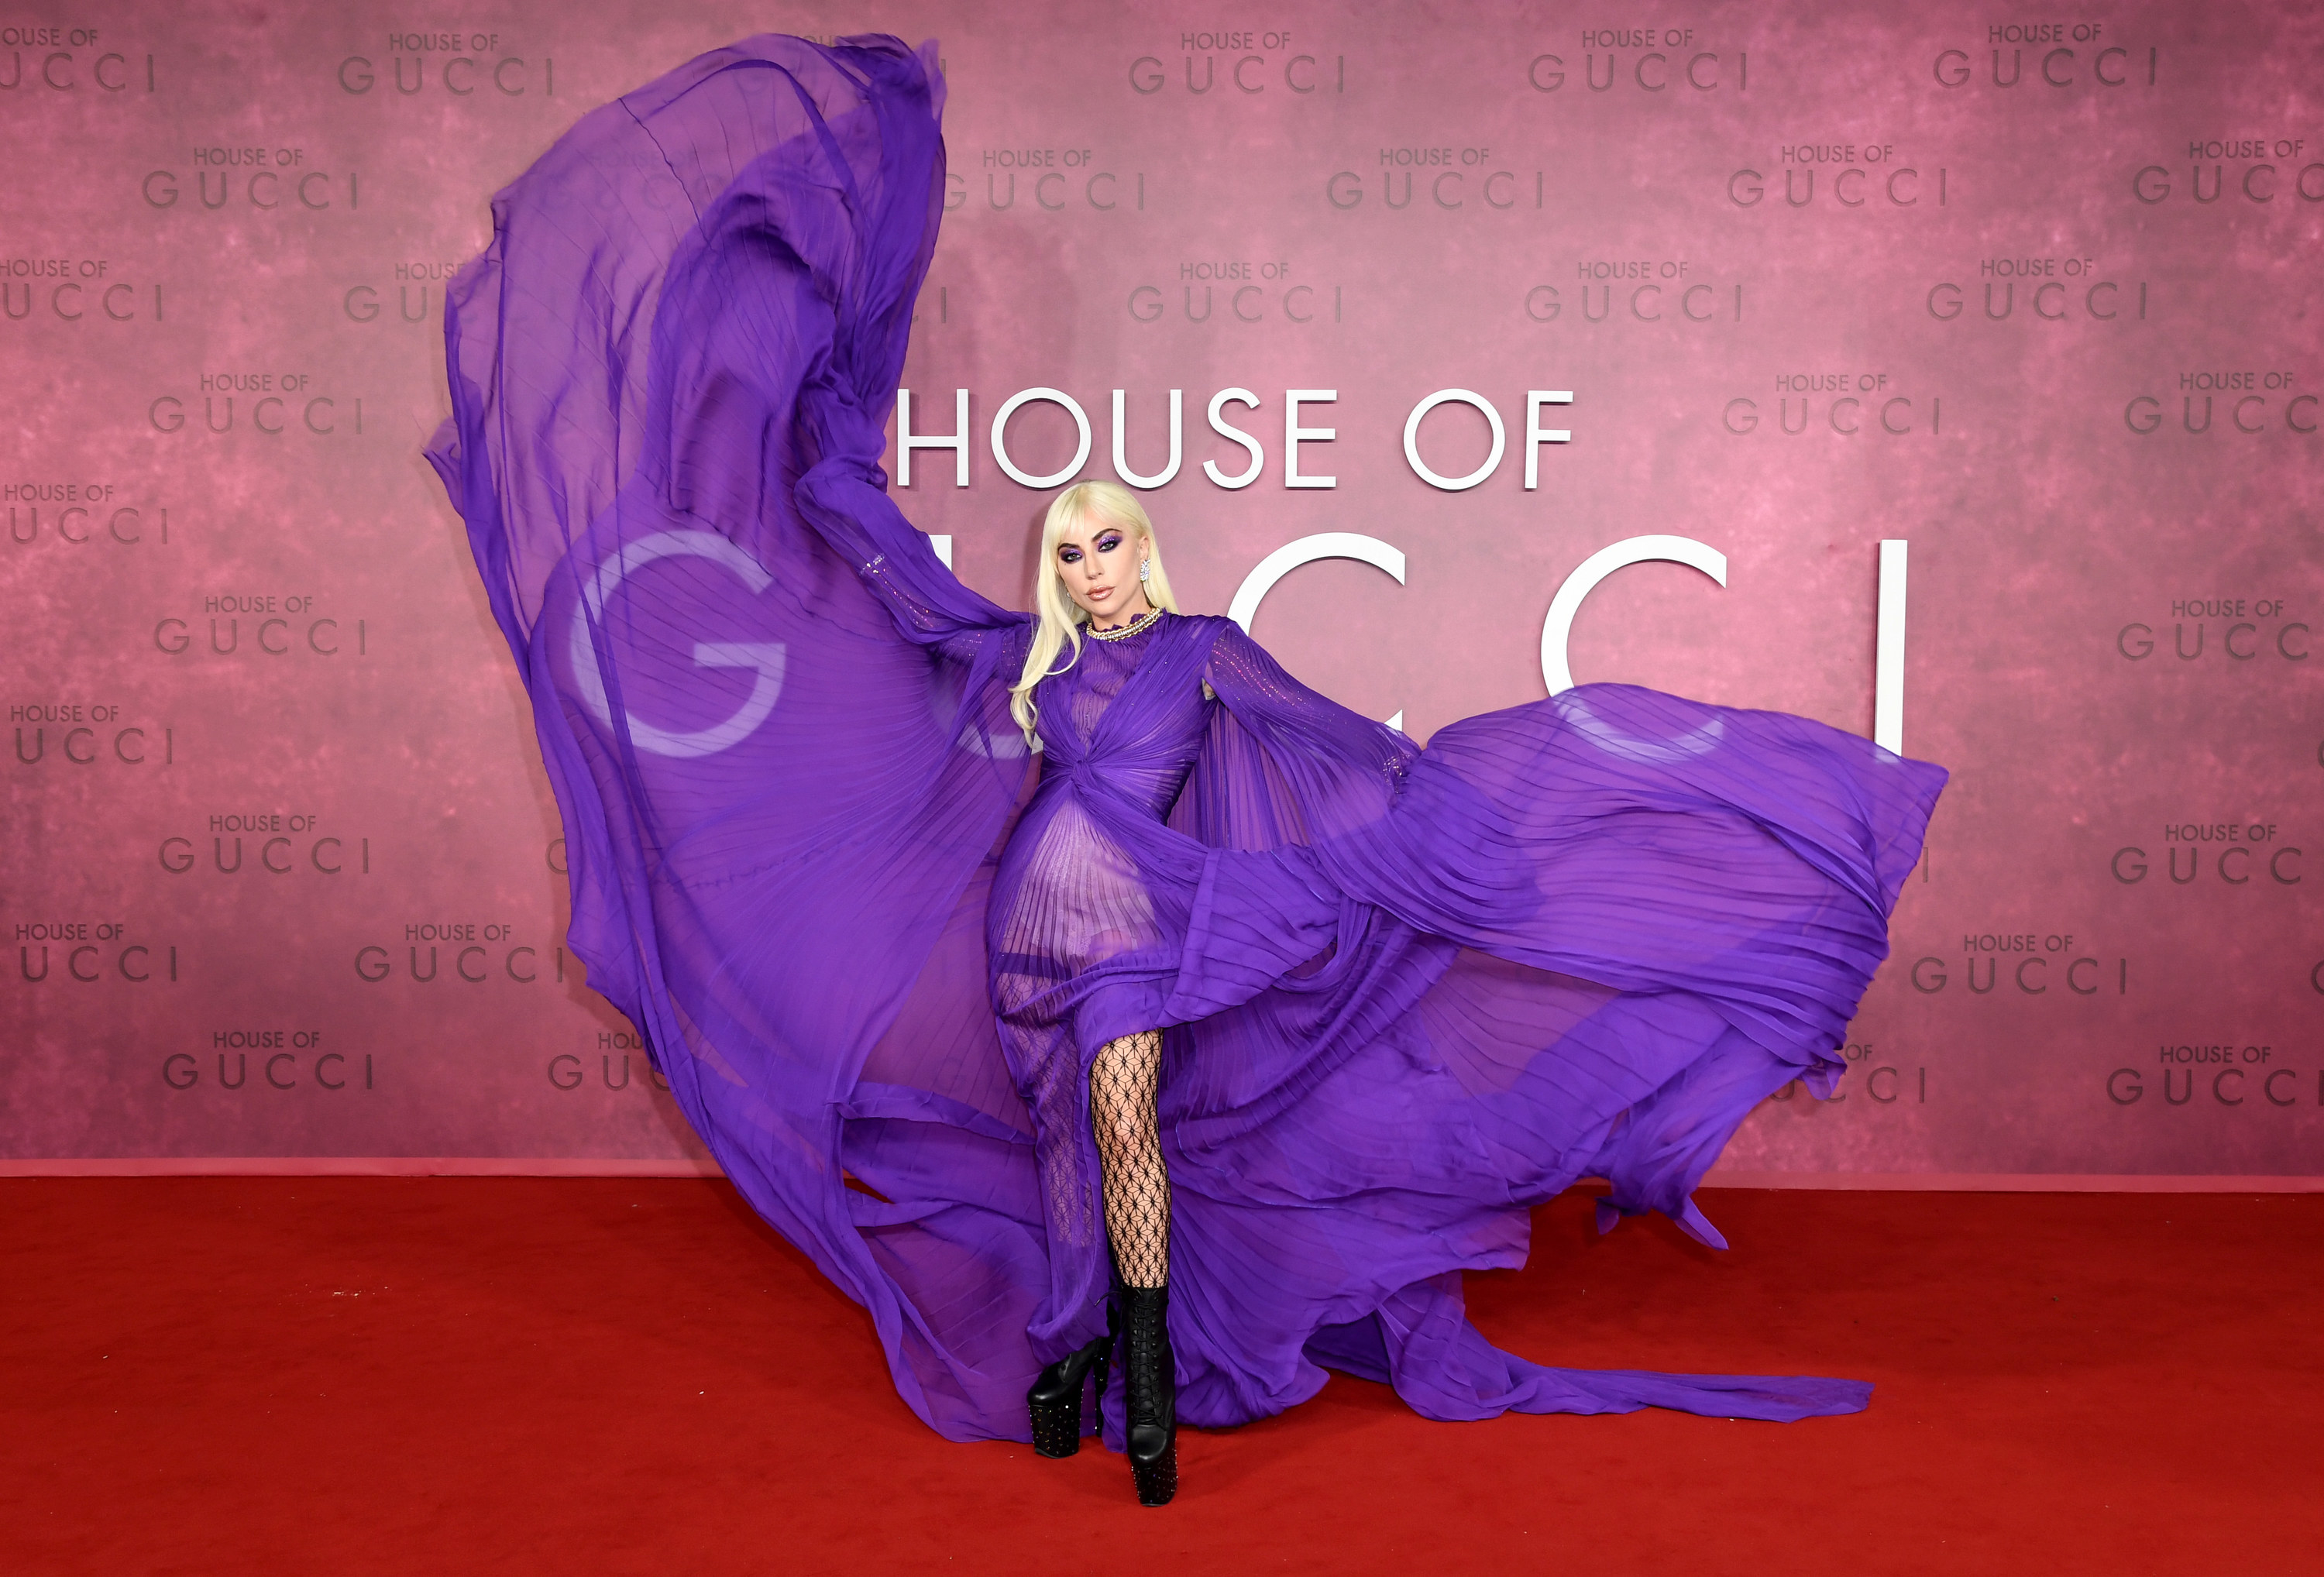 Gaga throwing up her gown so that it flows in the wind on the red carpet